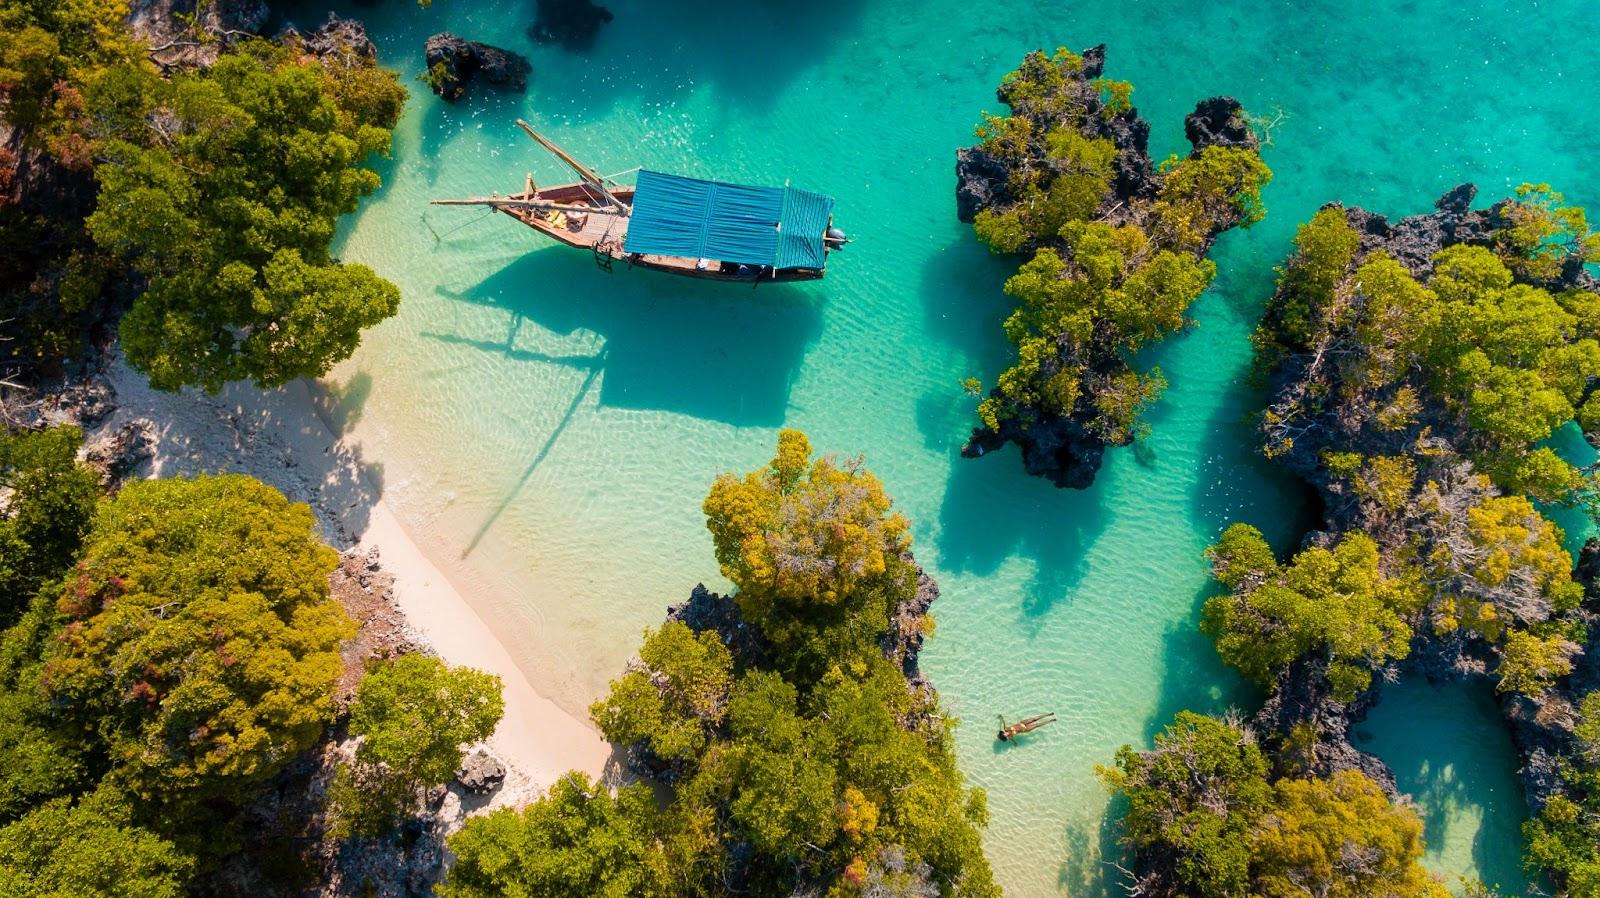 A birds eye view of a secluded beach and fishing boat. 